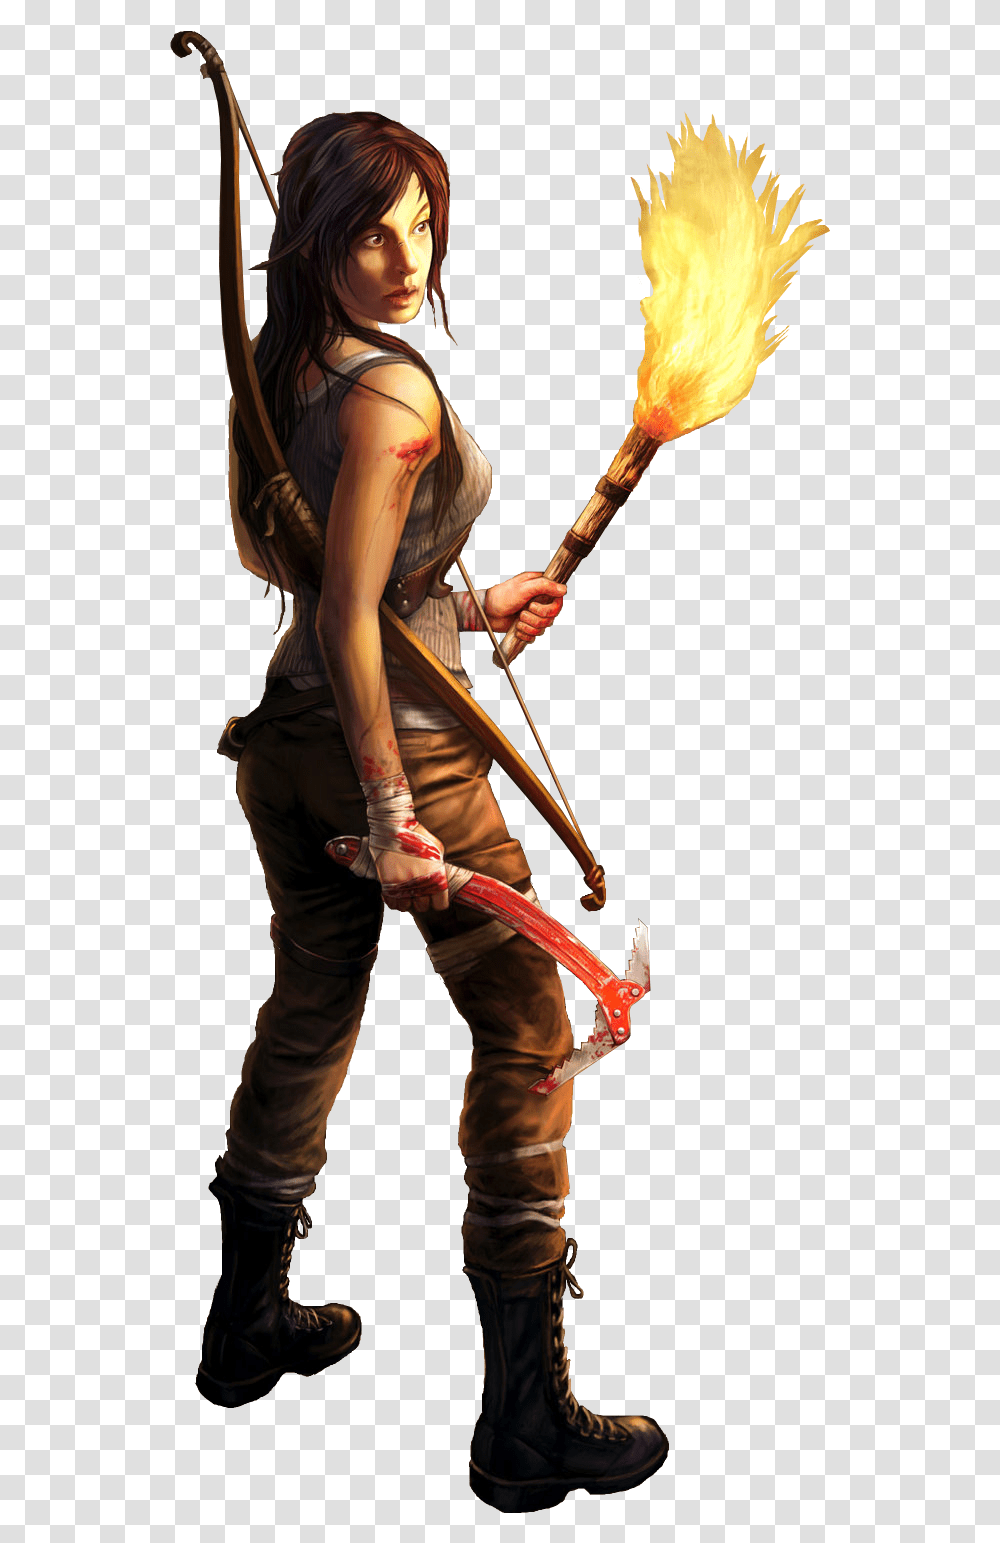 Download Lara Croft Tomb Raider With Bow Image For Free Tomb Raider Lara Croft, Person, Costume, Clothing, Leisure Activities Transparent Png